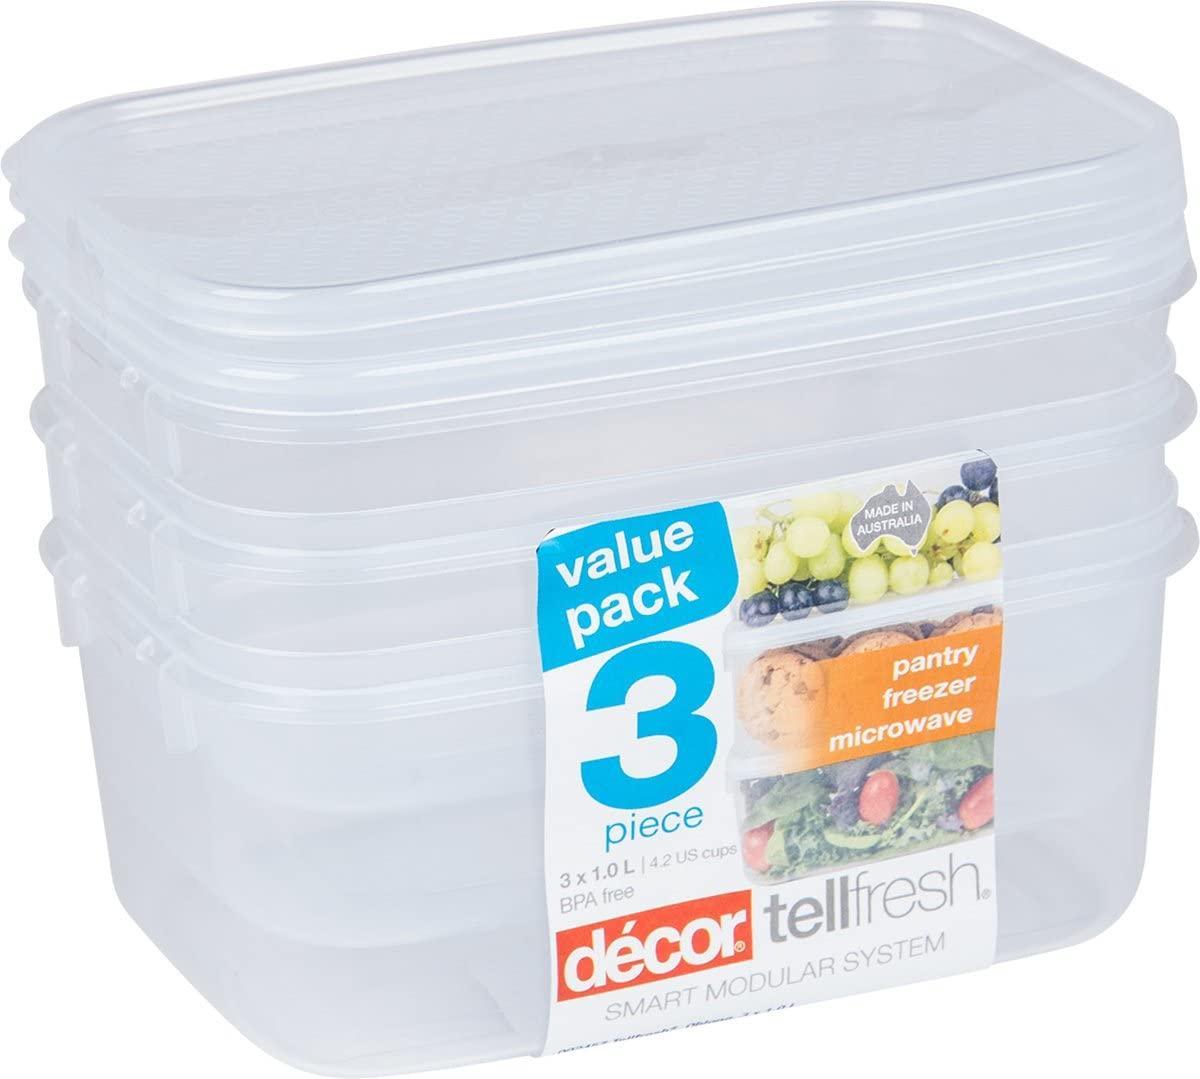 Décor 002457 006 Oblong Tell Fresh Food Storage Container, 1L, Pack of 3